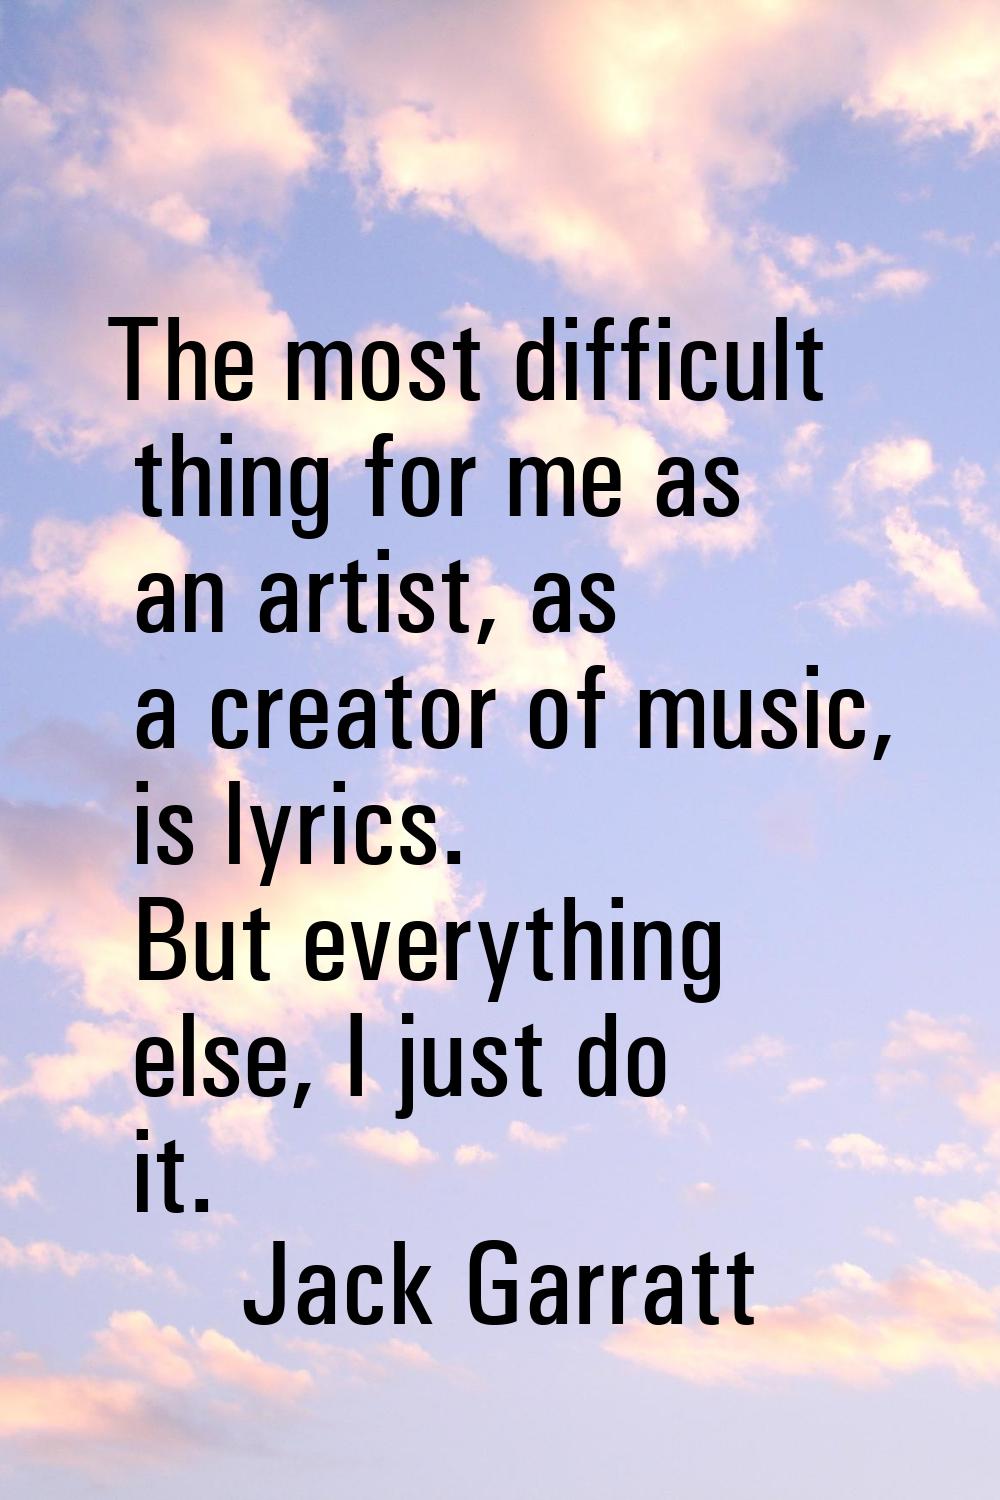 The most difficult thing for me as an artist, as a creator of music, is lyrics. But everything else